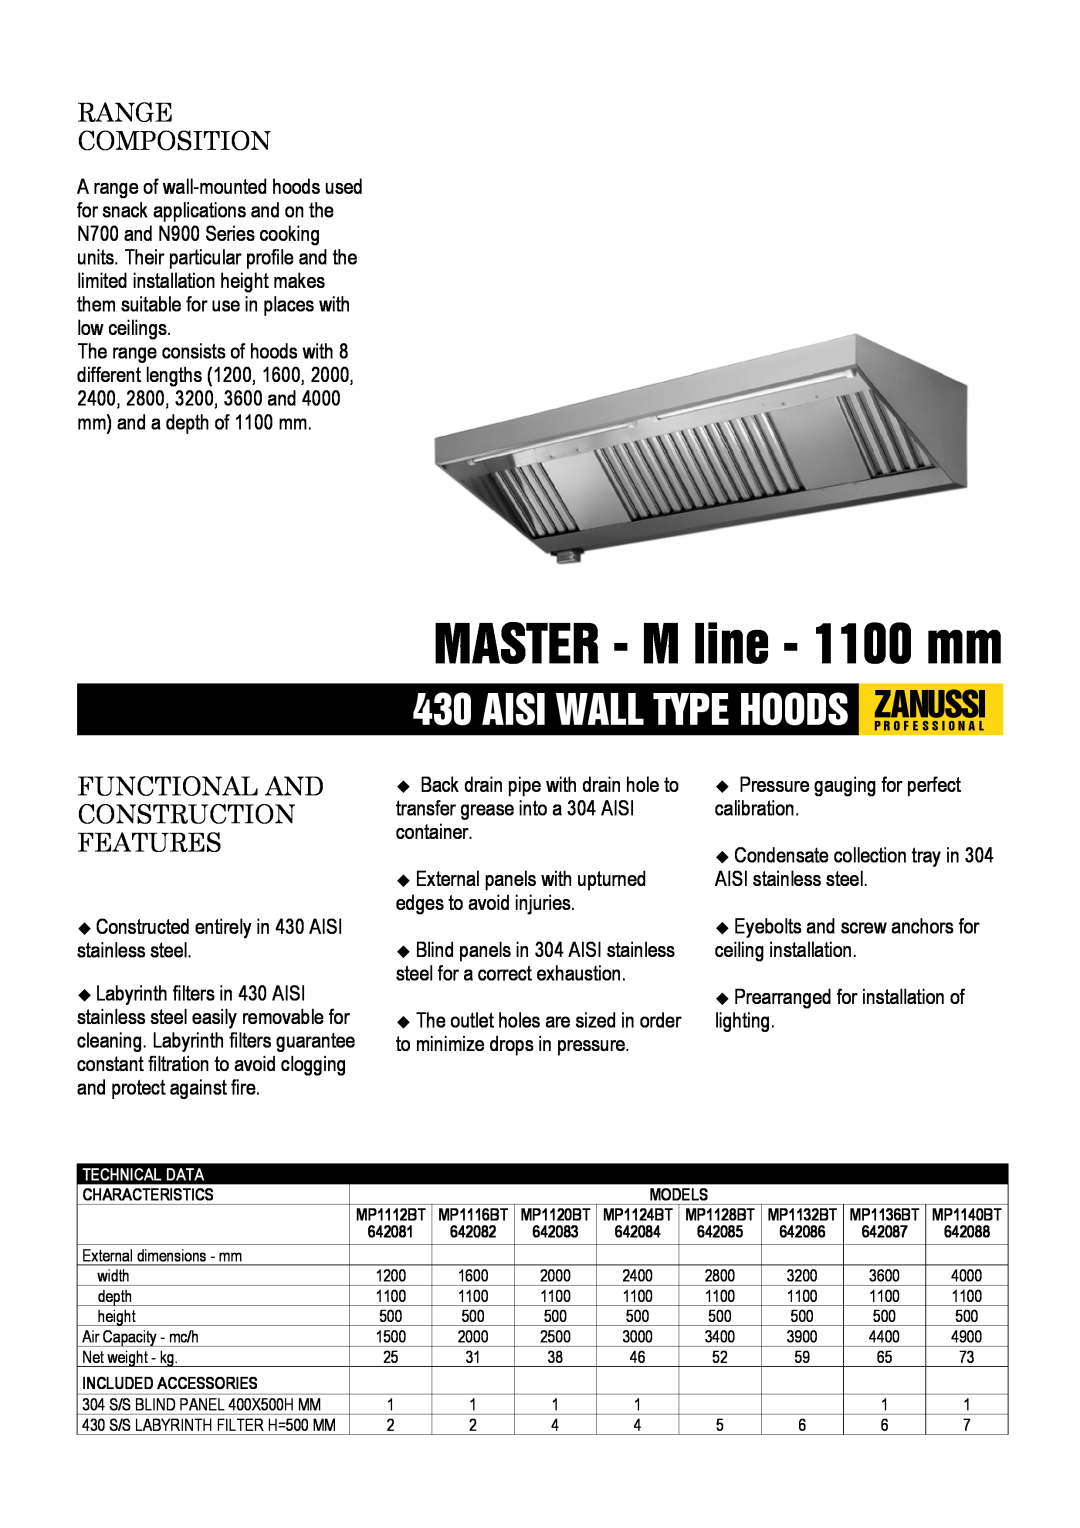 Zanussi 642087, 642082 dimensions MASTER - M line - 1100 mm, Range Composition, Functional And Construction Features 